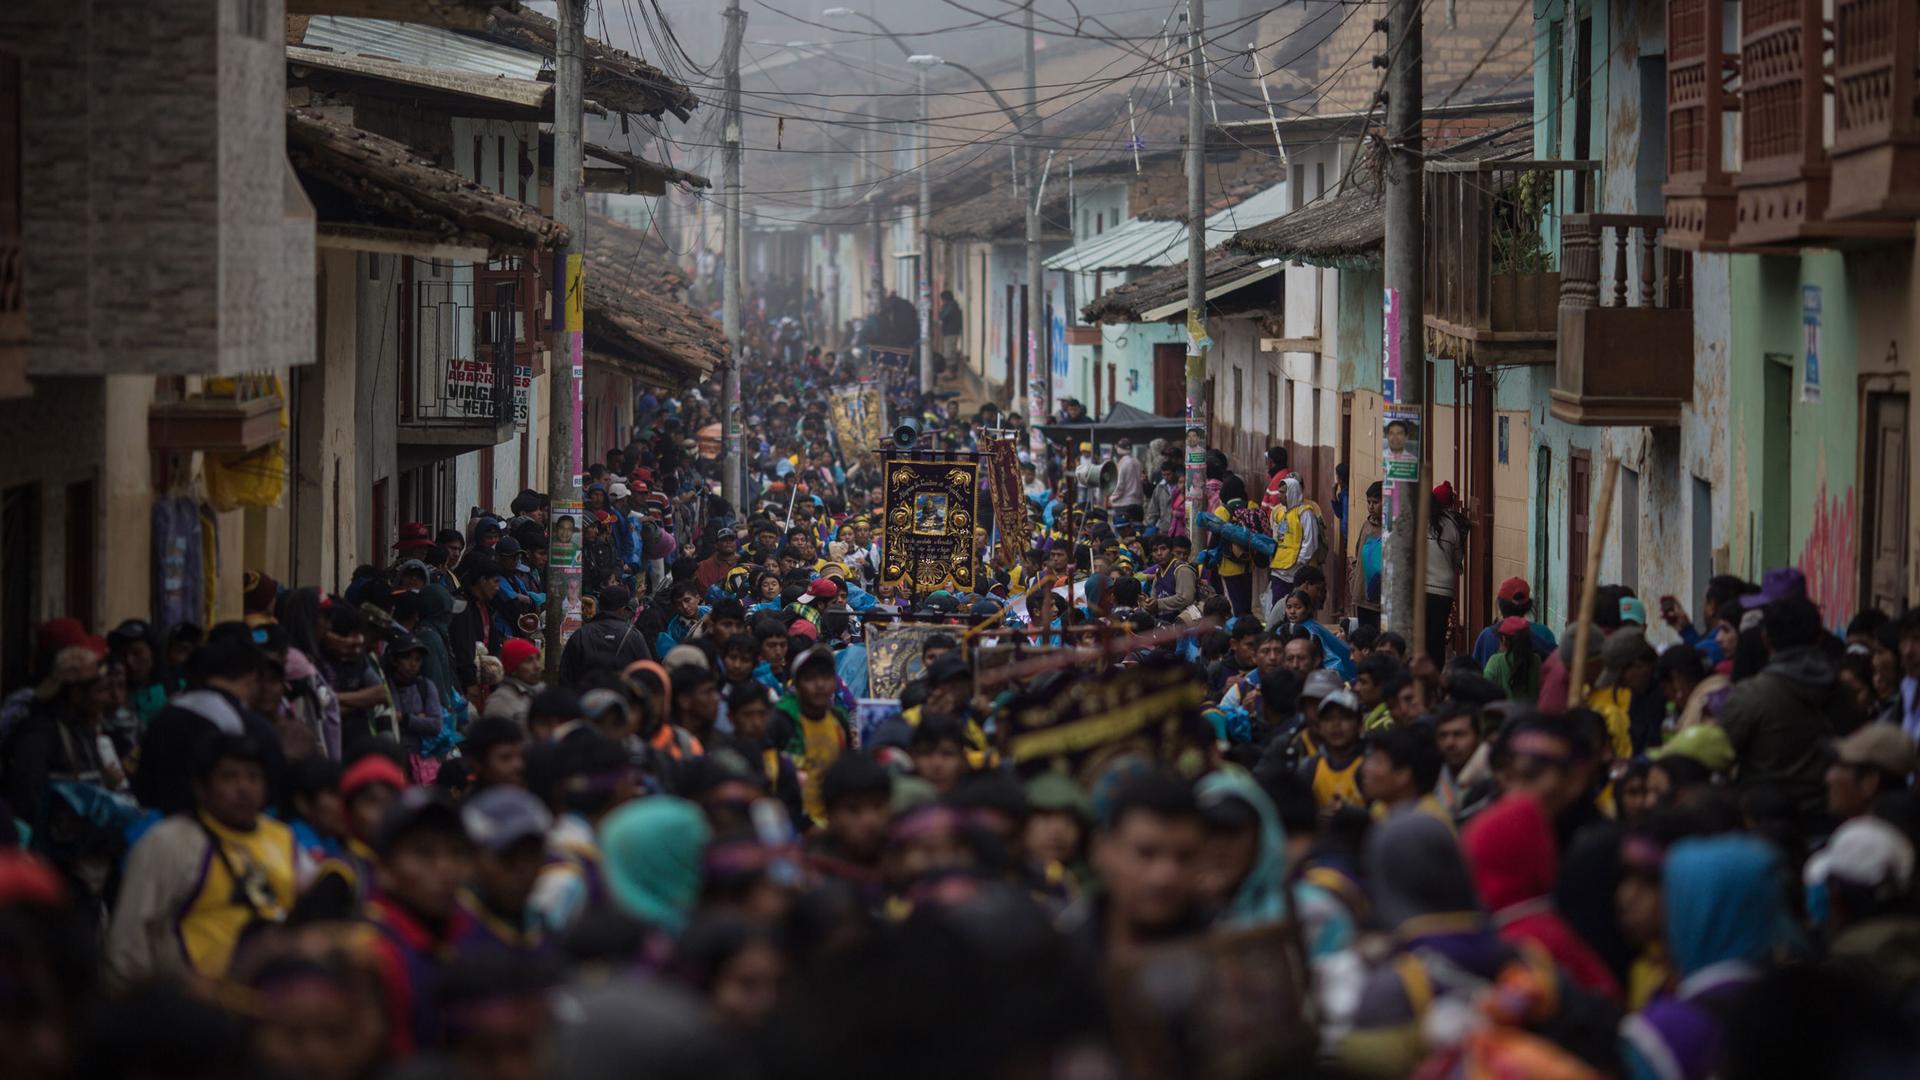 Piura Street in Ayabaca, Peru, is shown filled with people the entire length of the photo with buildings on either side.